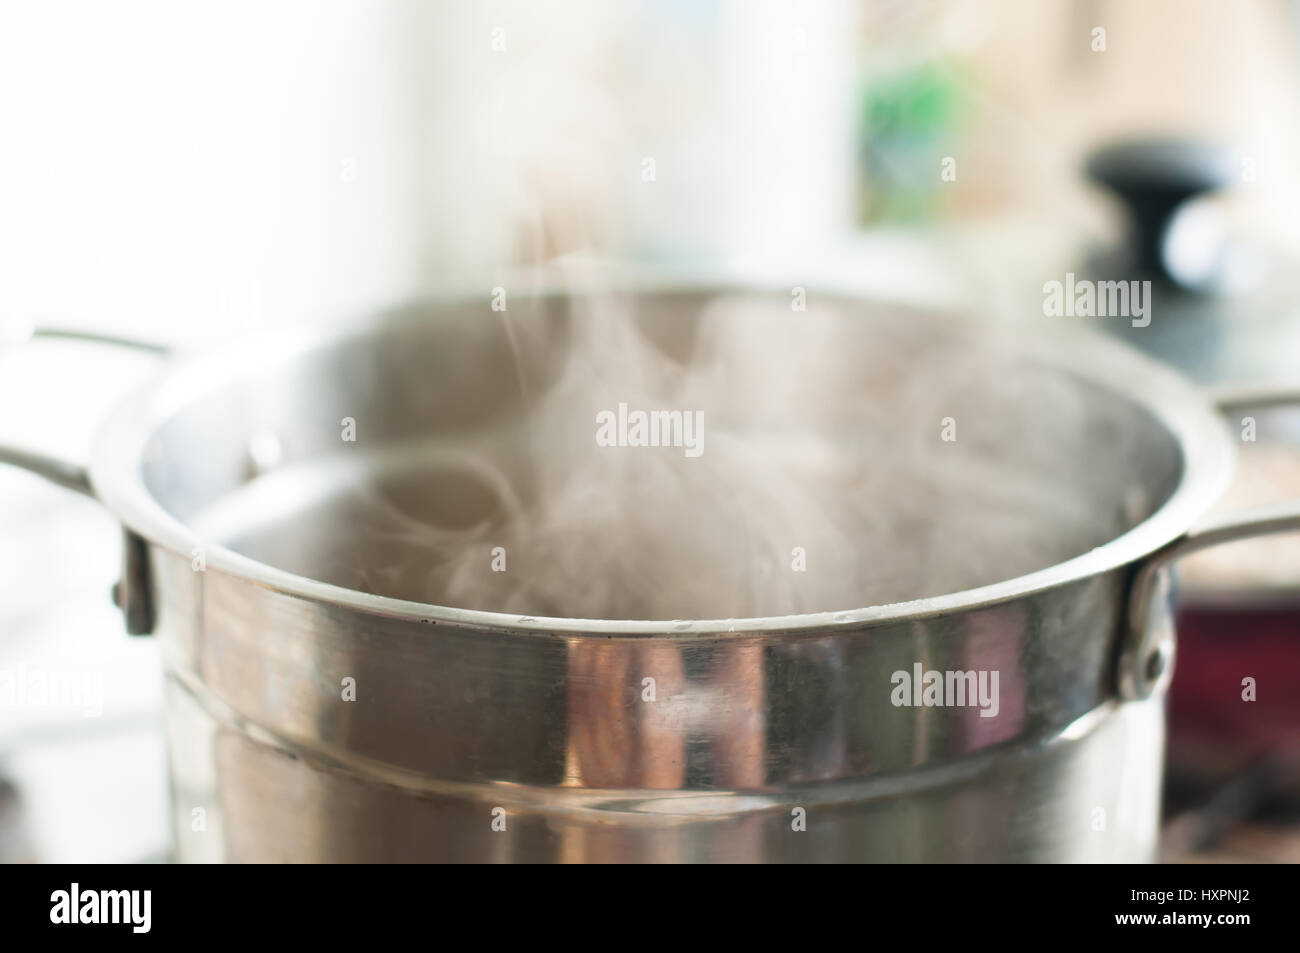 https://c8.alamy.com/comp/HXPNJ2/steel-pot-on-the-fire-with-water-inside-boiling-with-steam-HXPNJ2.jpg